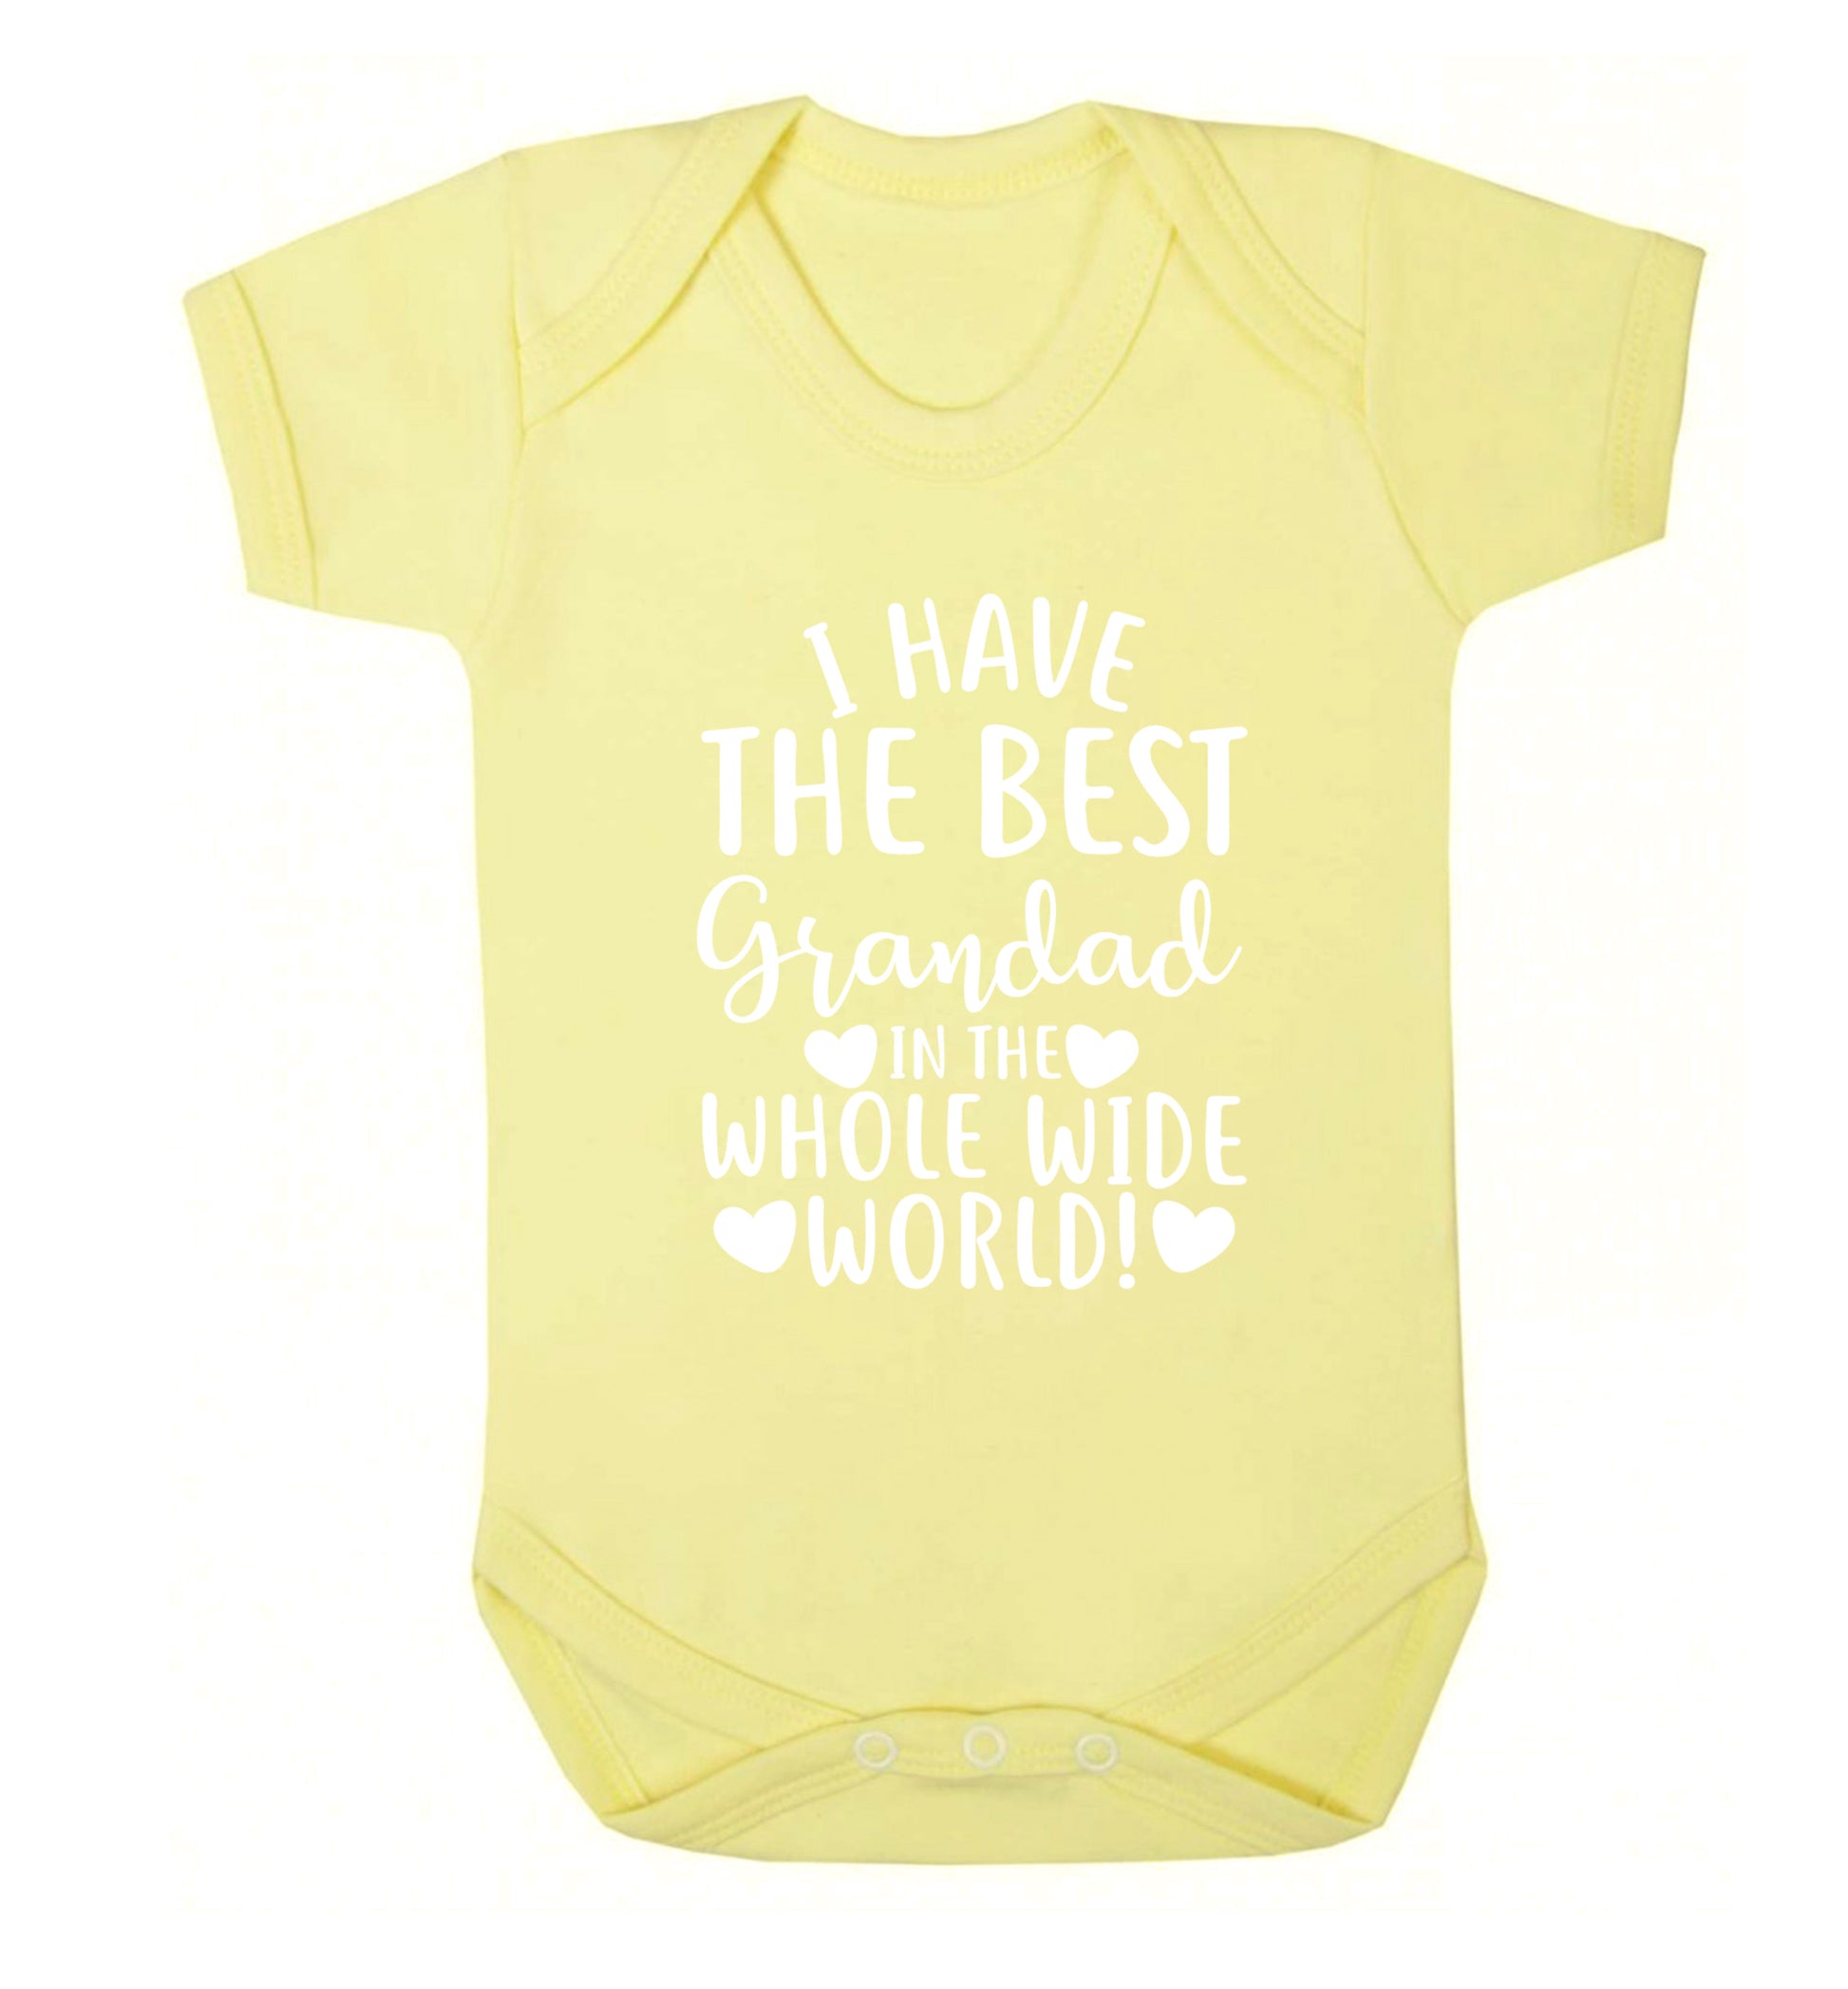 I have the best grandad in the whole wide world! Baby Vest pale yellow 18-24 months